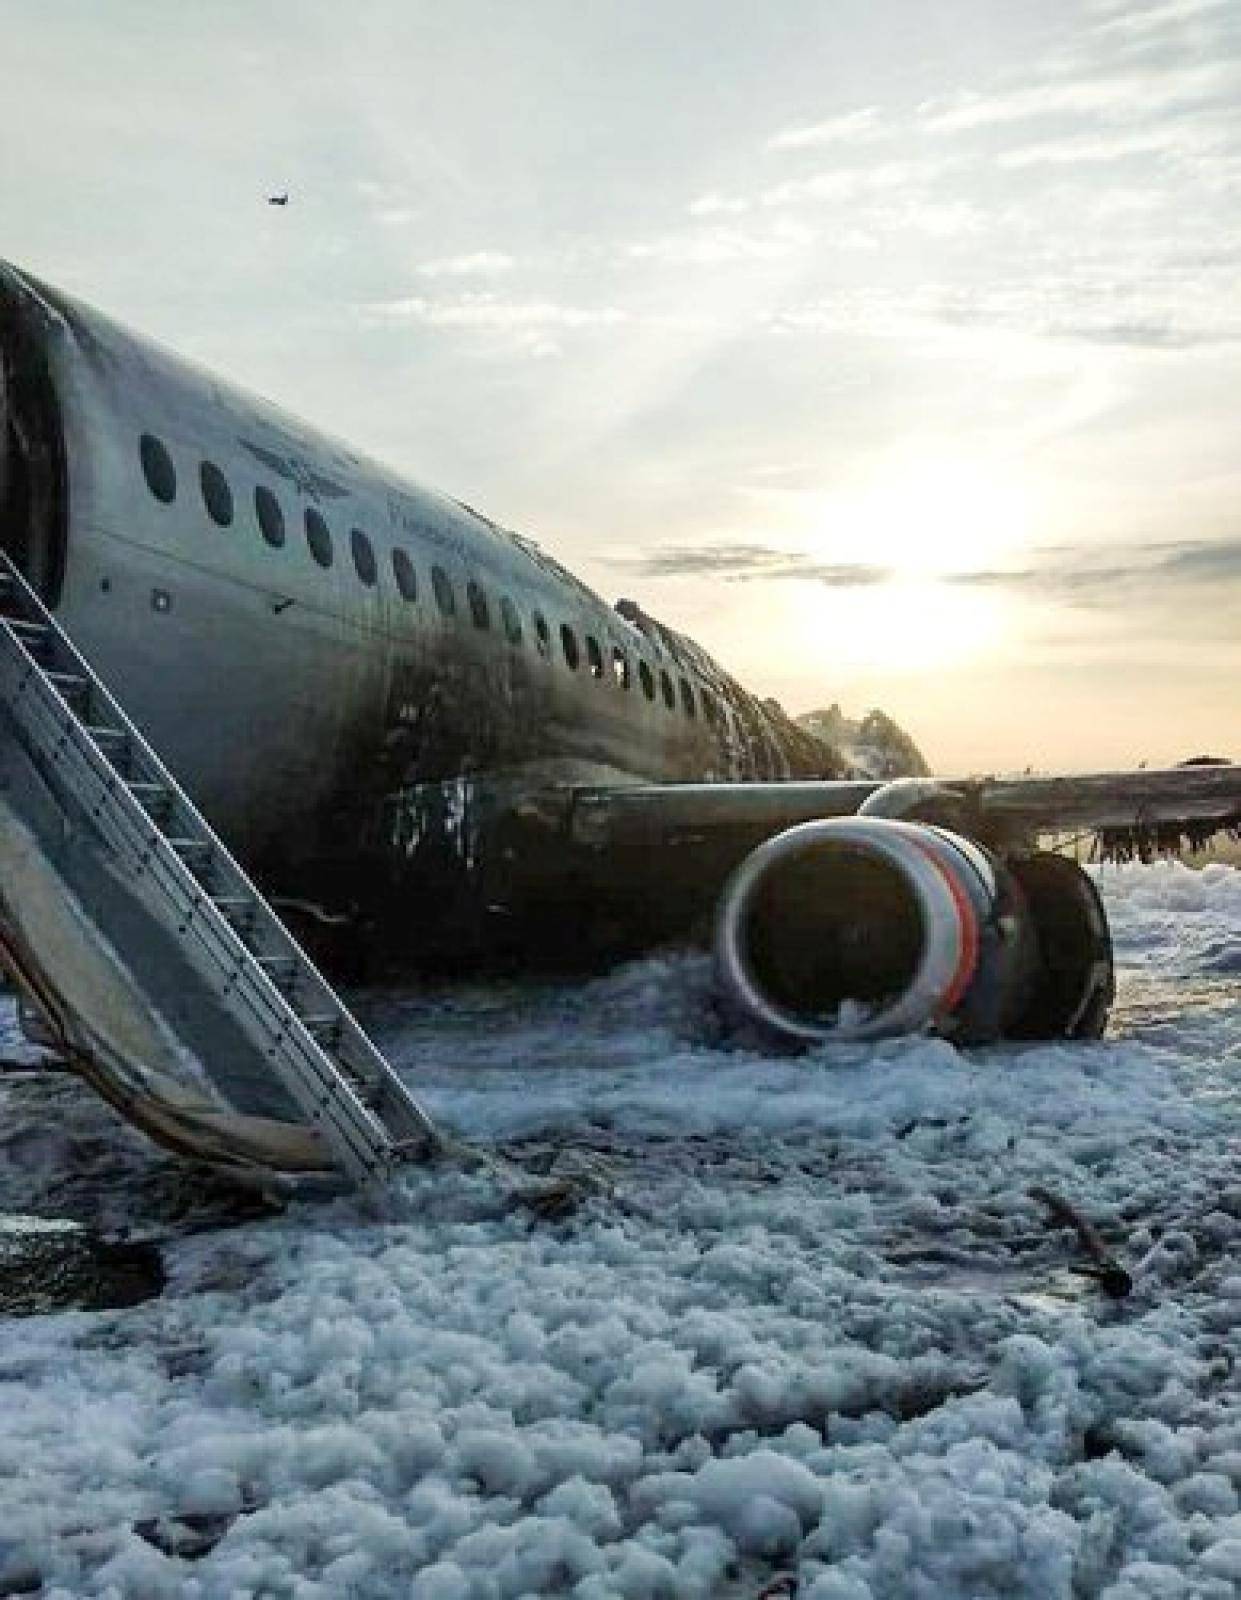 A view shows a damaged Aeroflot Sukhoi Superjet 100 passenger plane after an emergency landing at Moscow's Sheremetyevo airport